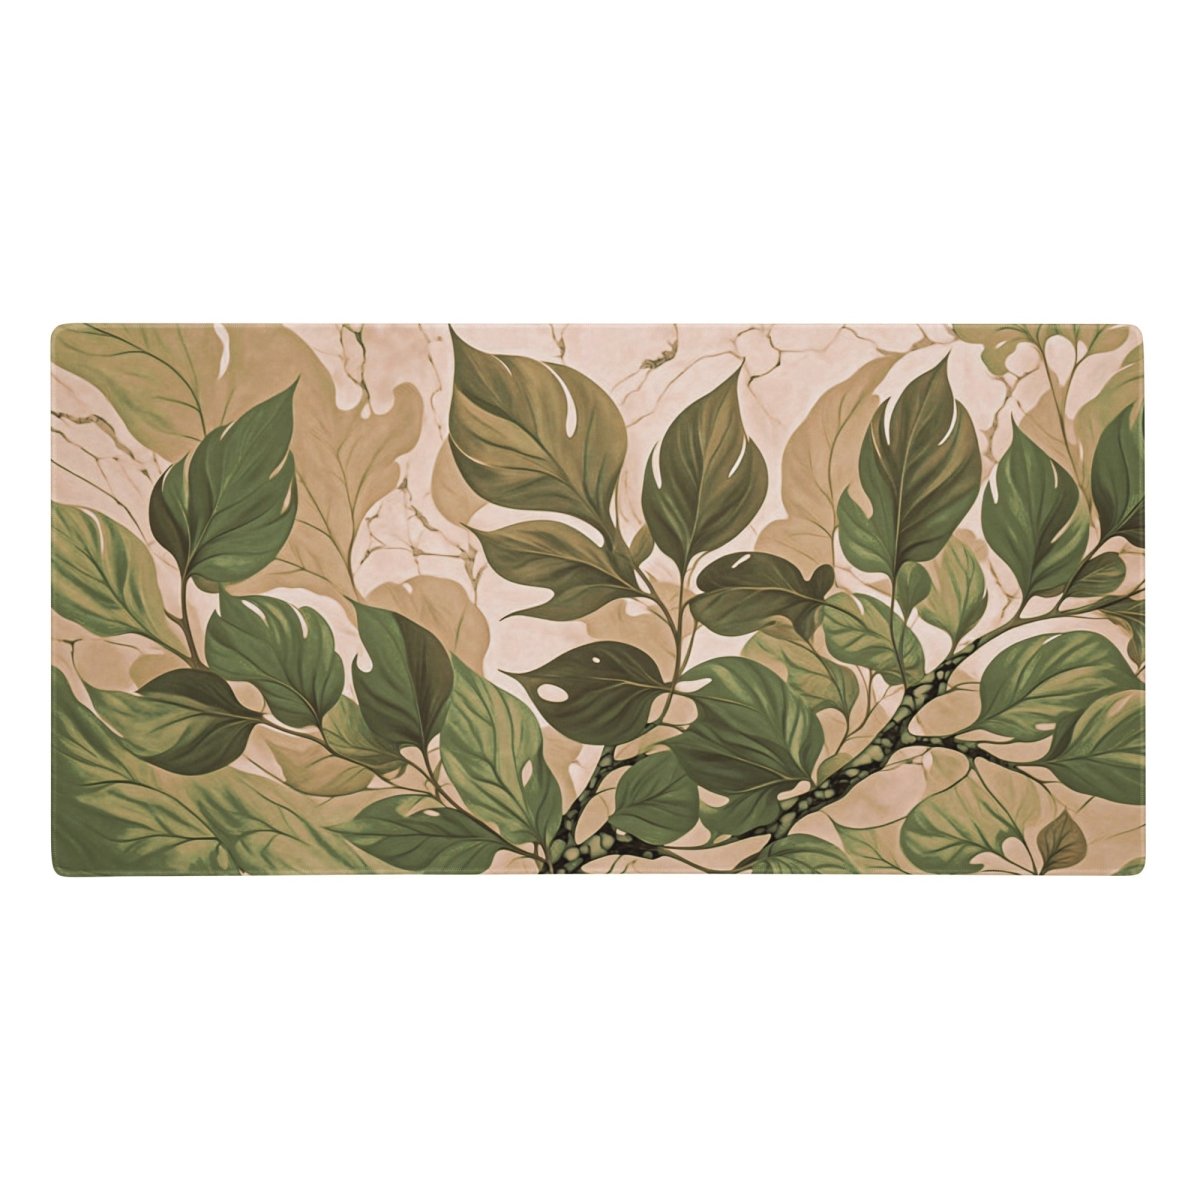 Vintage nature - Gaming mouse pad - Ever colorful